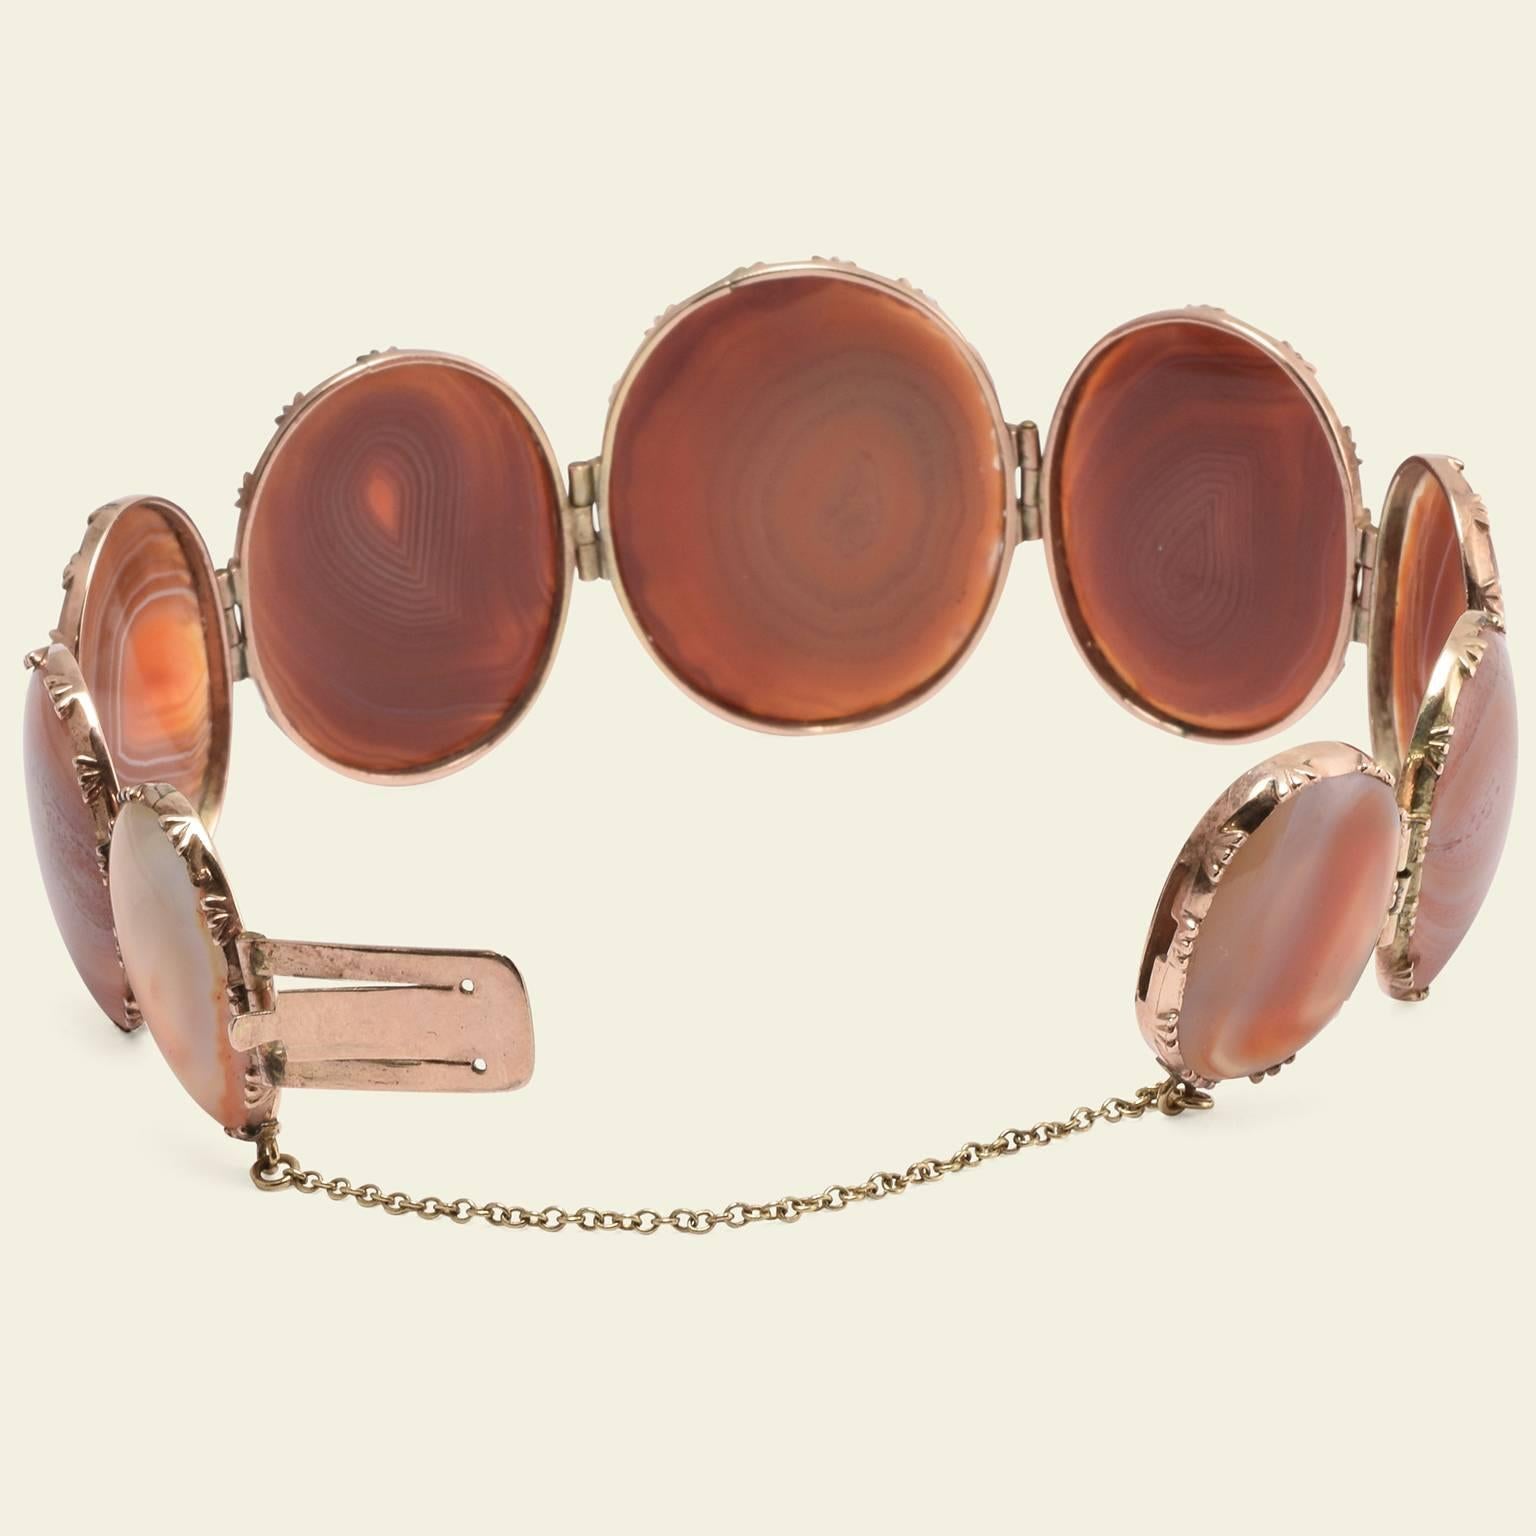 Agate is a variety of chalcedony, a member of the quartz family. The stone takes its name from the Achetes River in Sicily where it was first discovered more than two millennia ago. Agate is most often seen in Georgian and Victorian jewelry carved